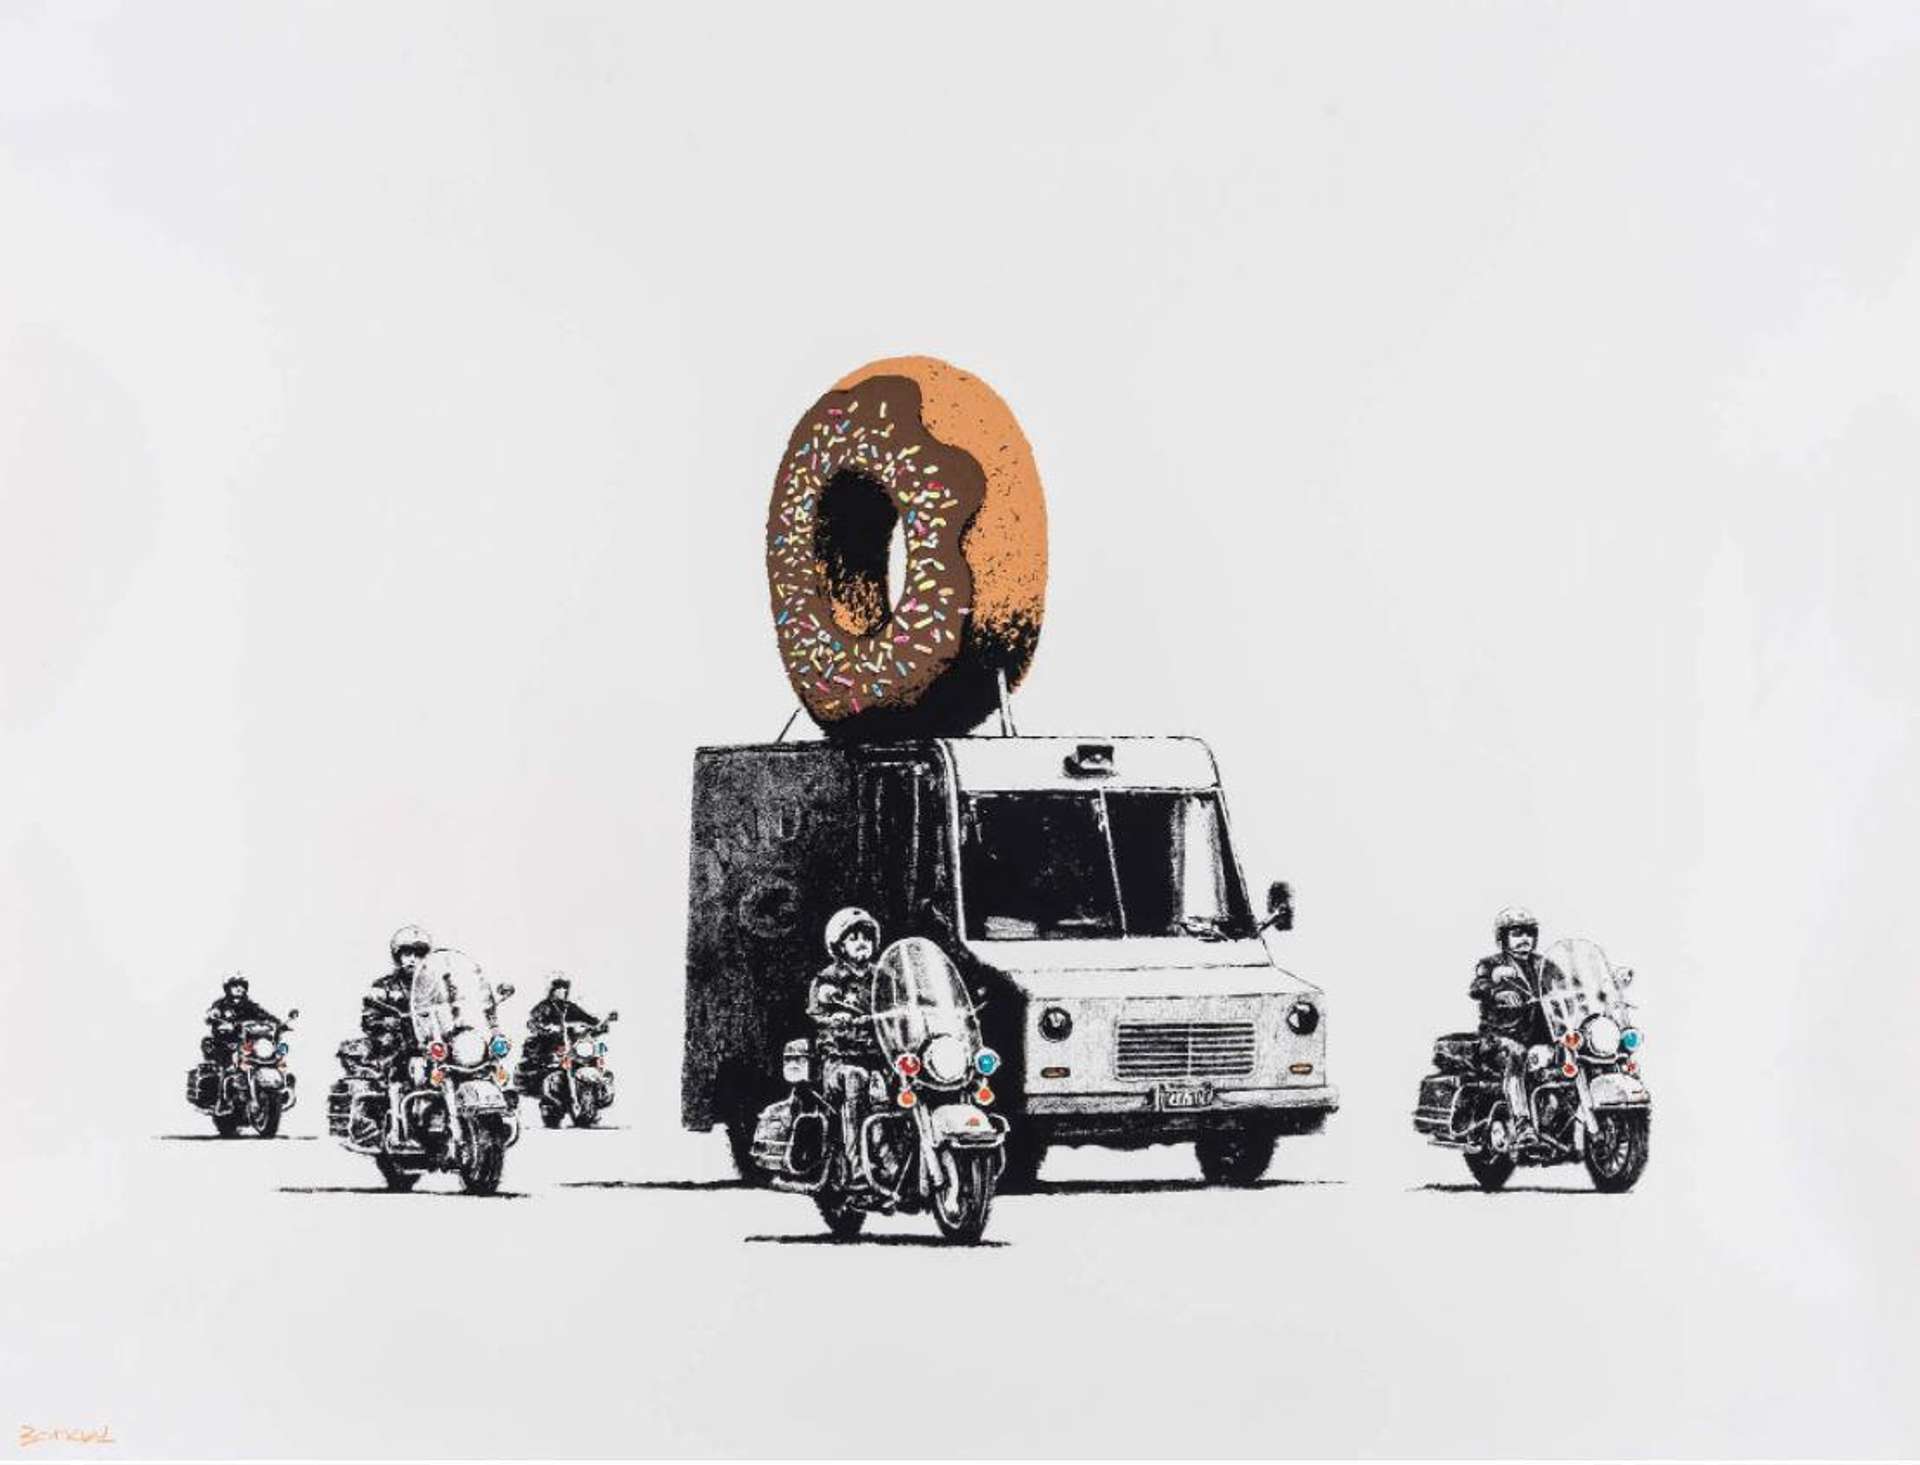 Donuts  Chocolate (special edition) - Signed Print by Banksy 2009 - MyArtBroker